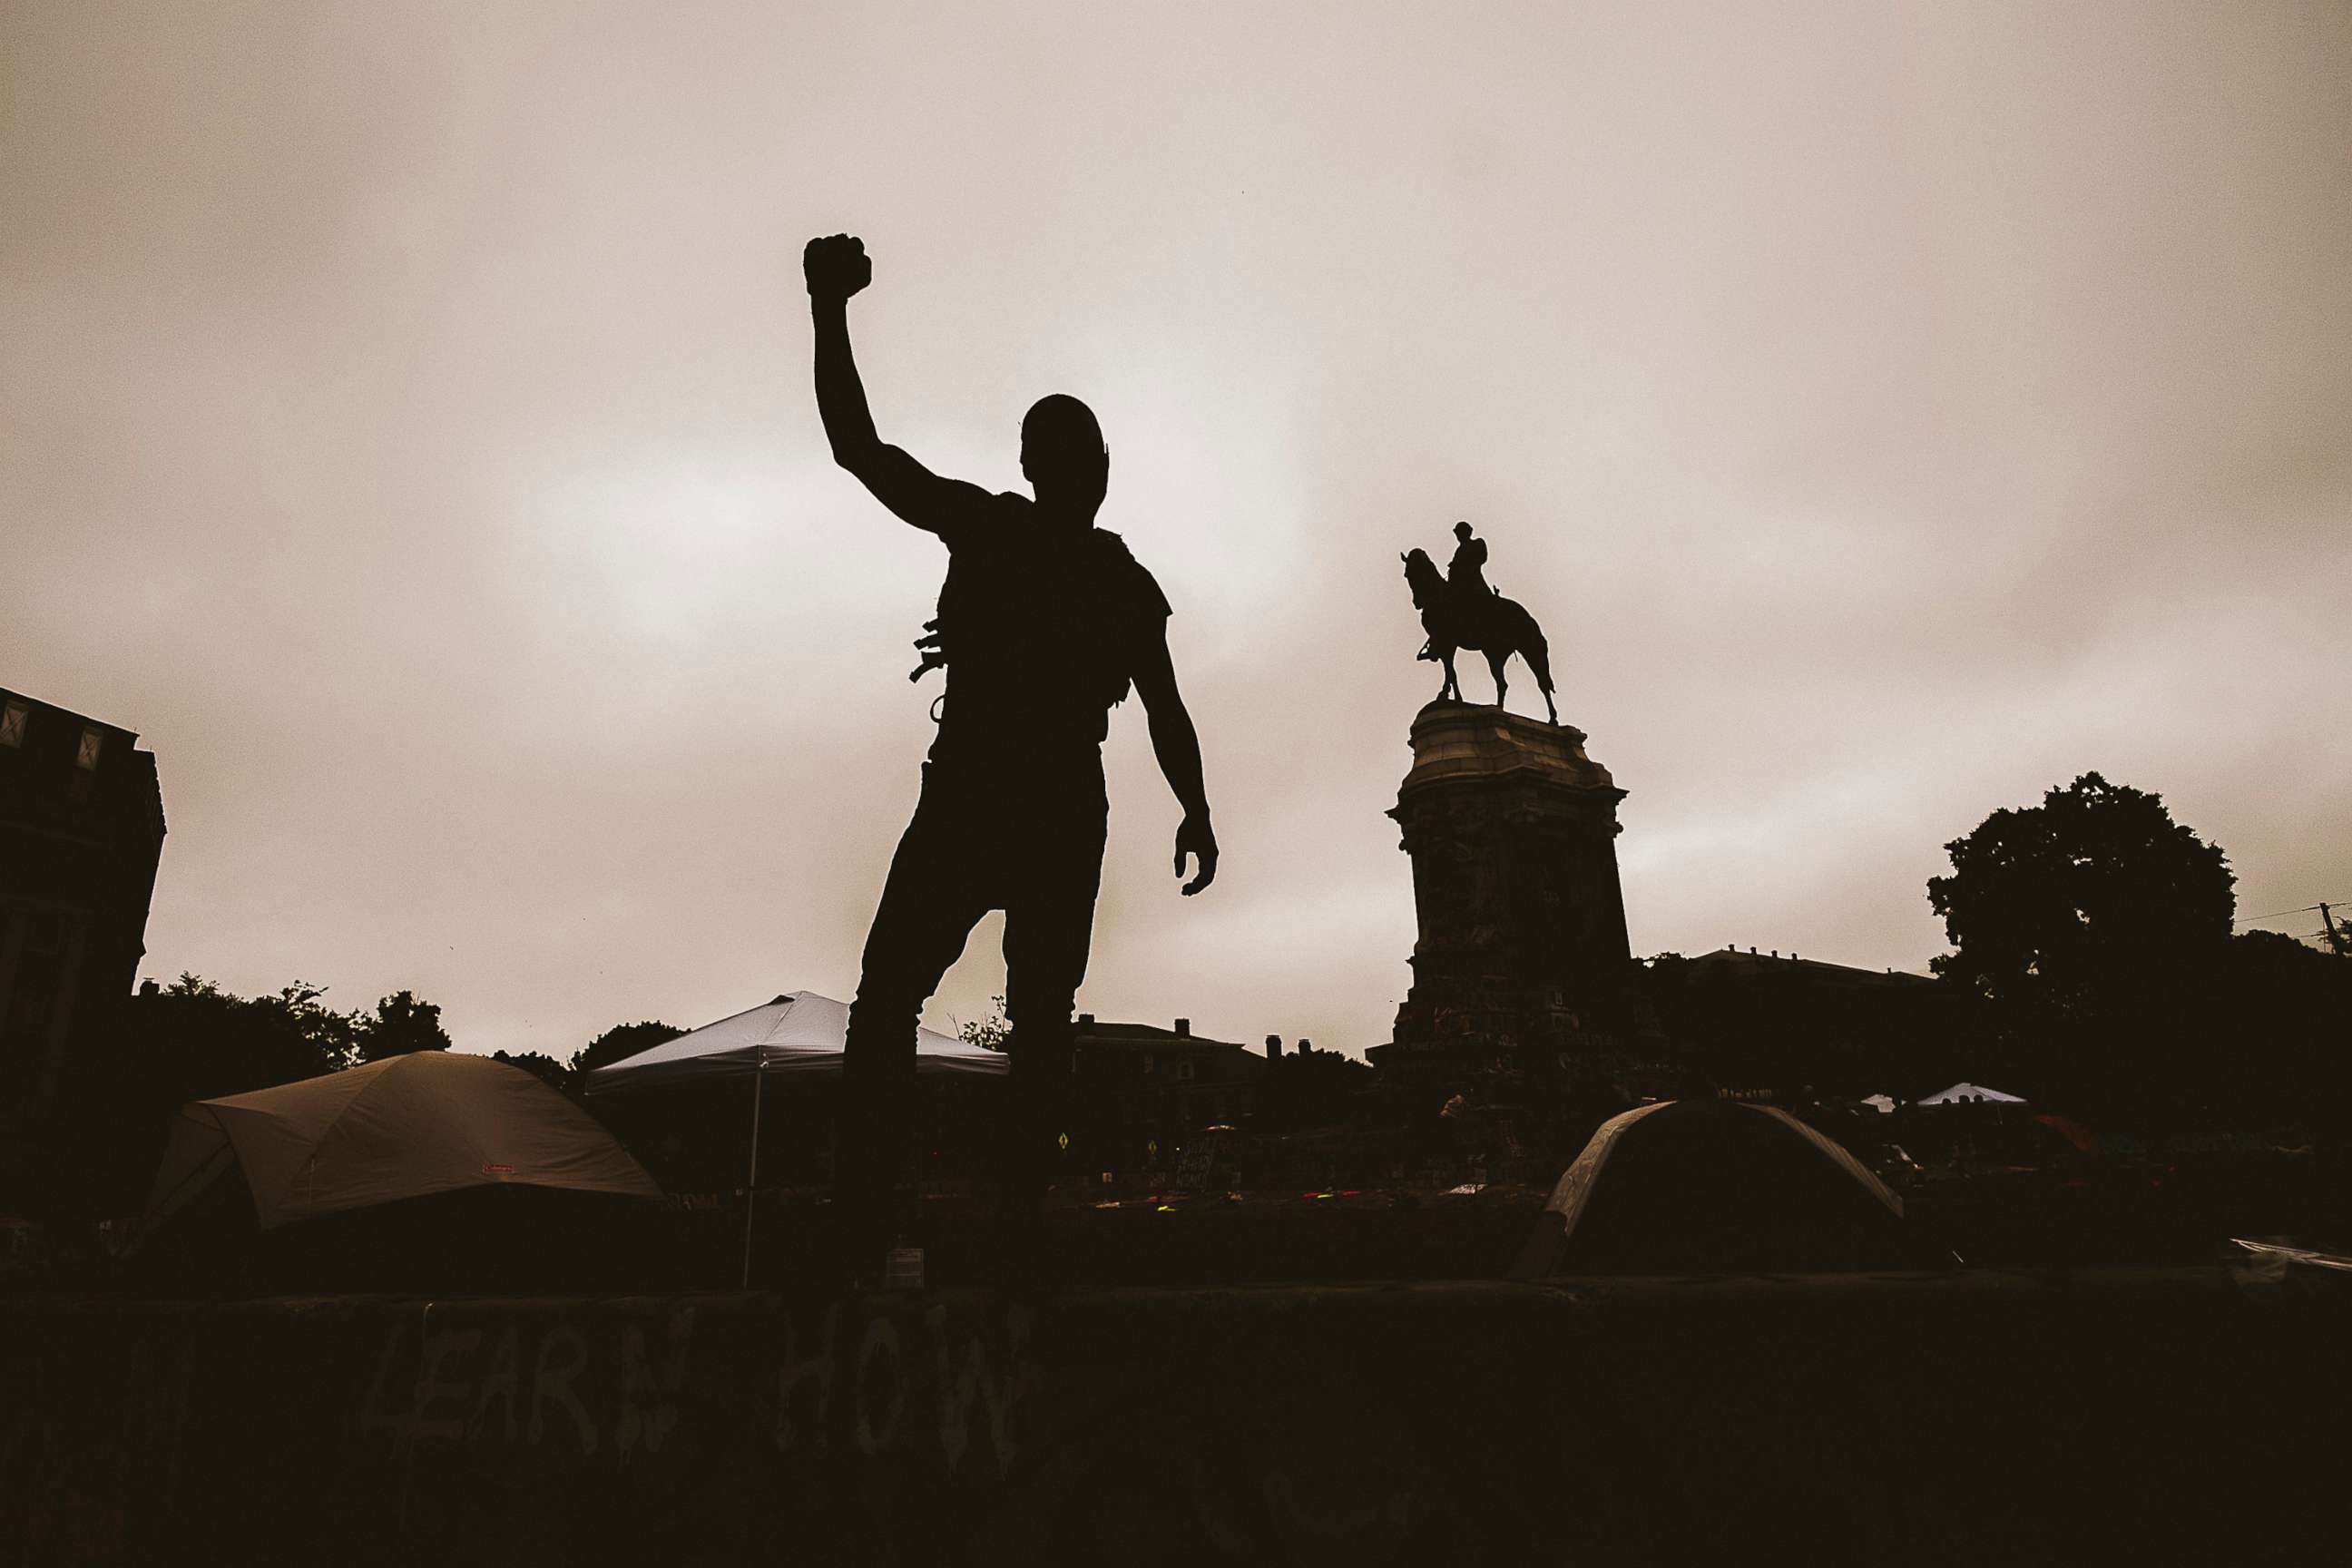 PHOTO: A protester raises their fist in the air at the Robert E. Lee monument in Richamond, Va., June 20, 2020.